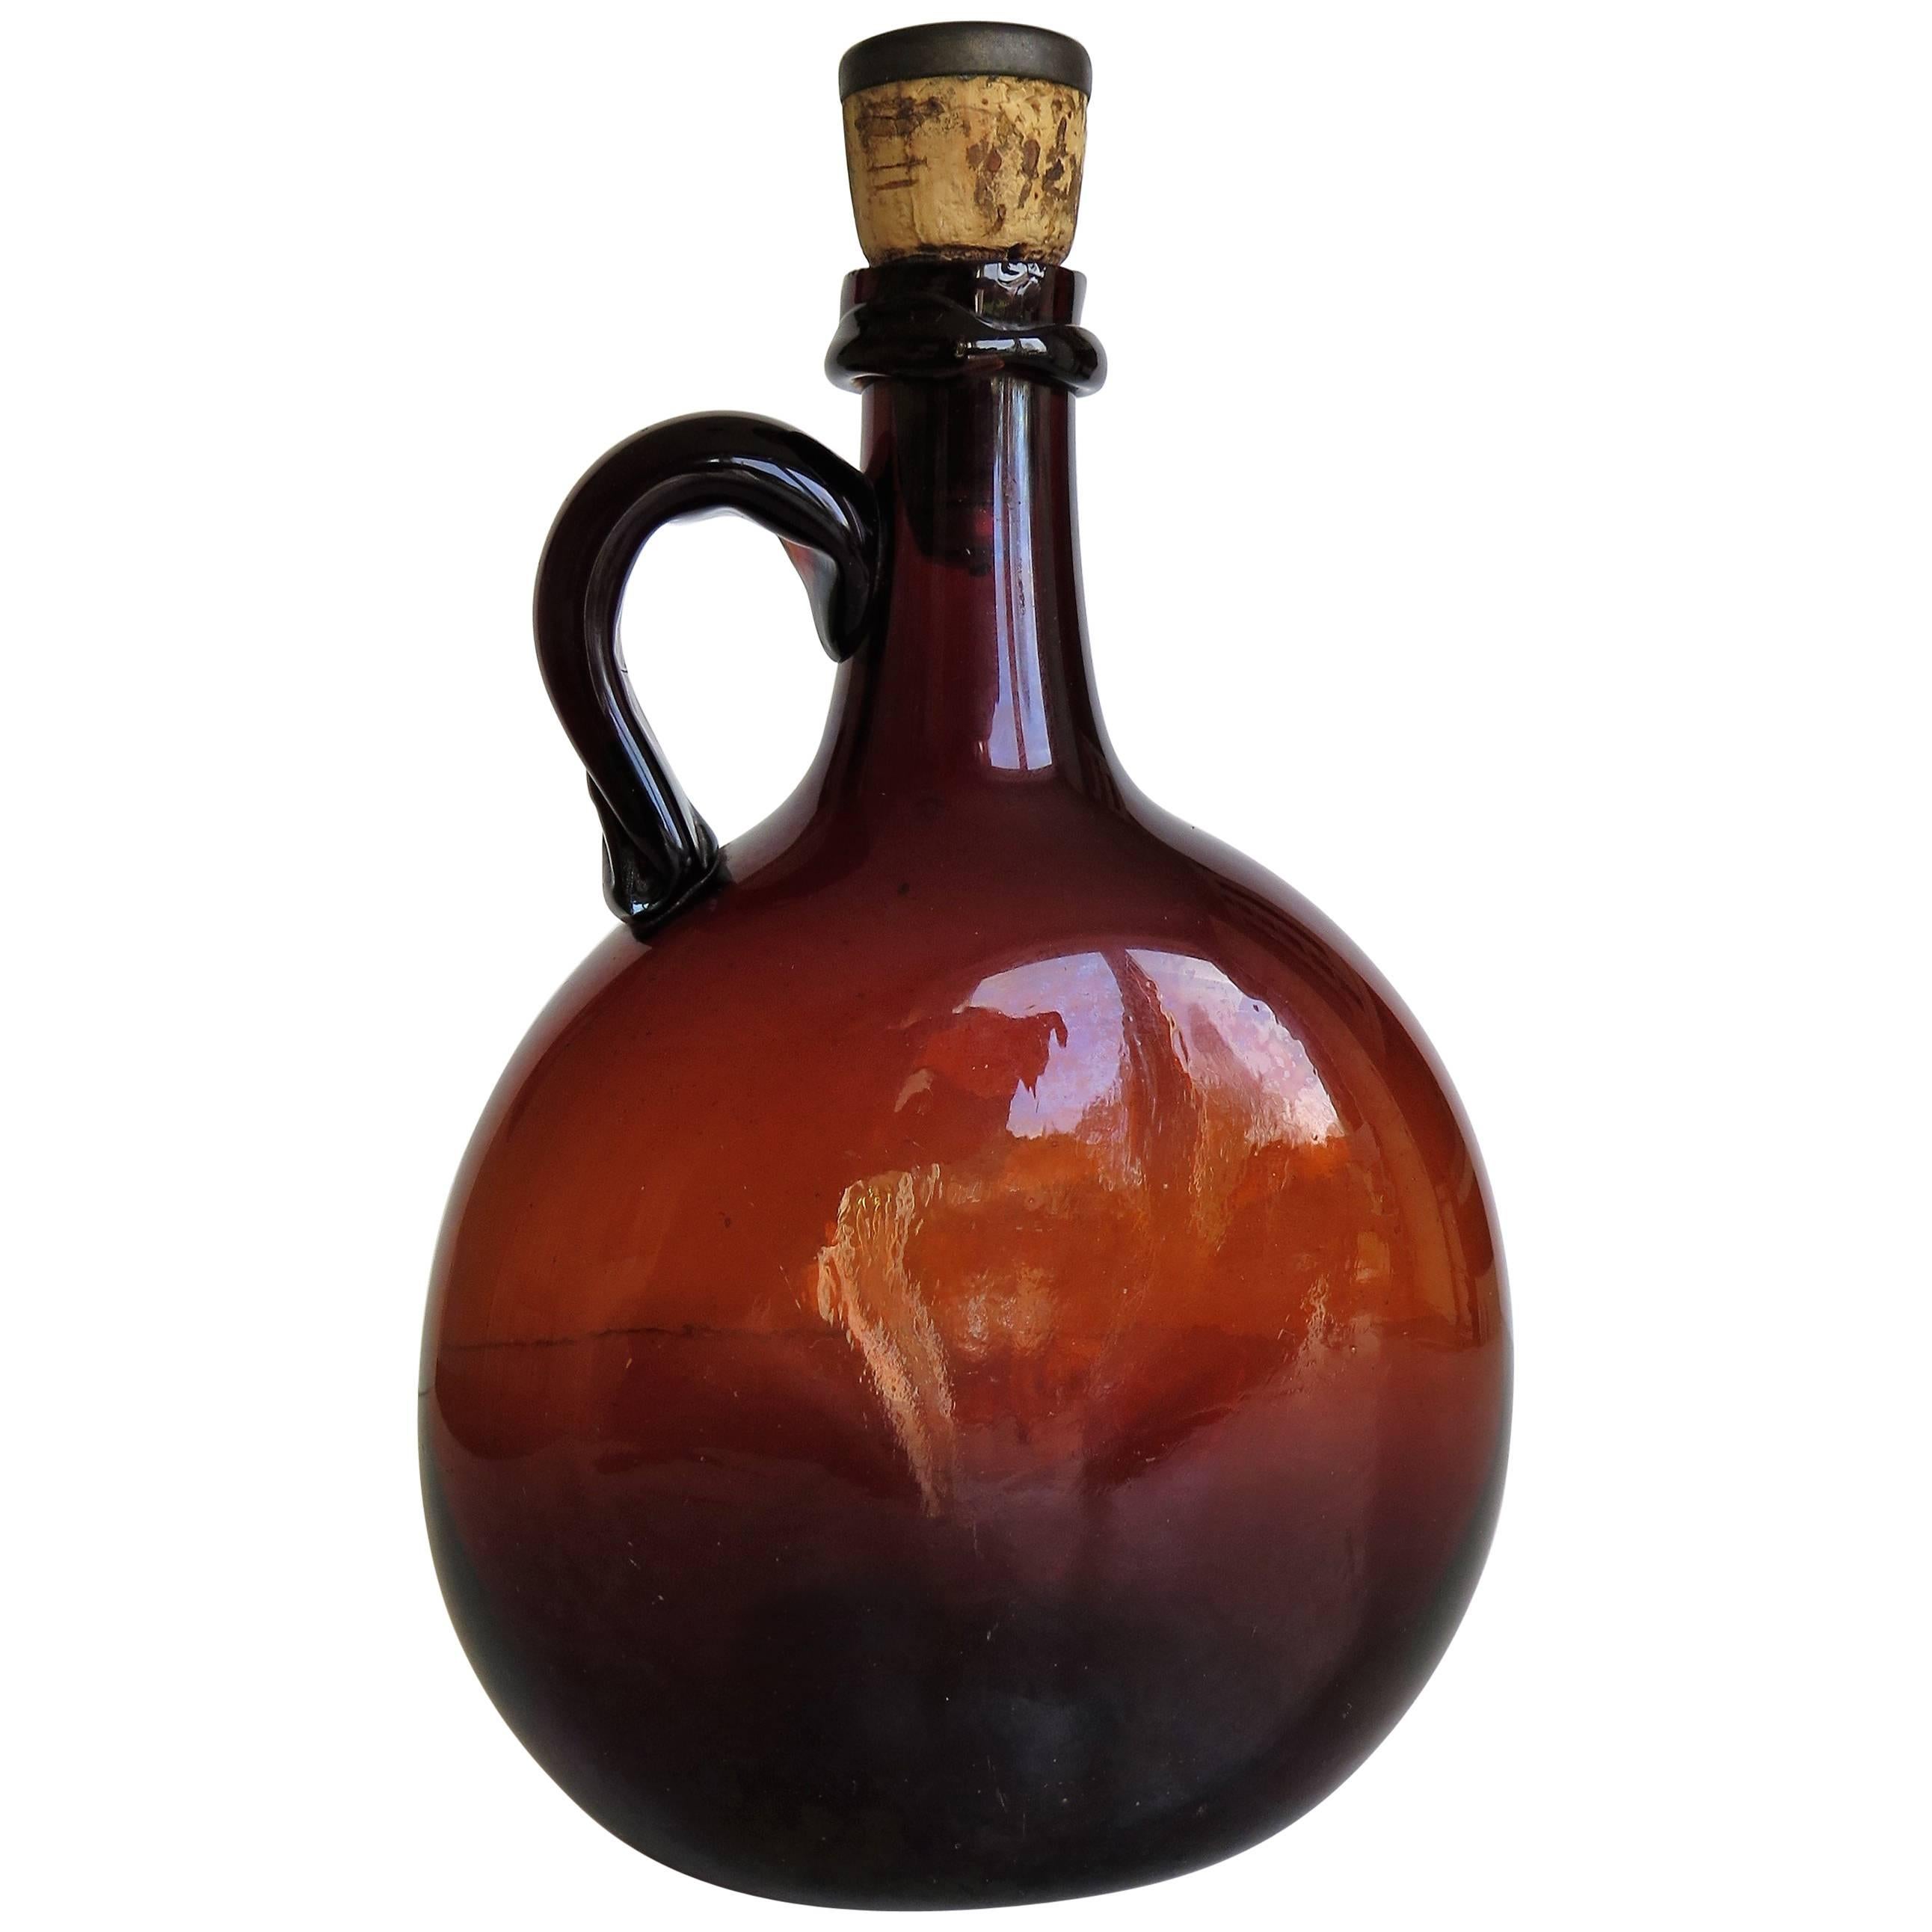 Amber Glass Flagon or Jug with Cork and Metal Stopper Handblown, Ca 1825